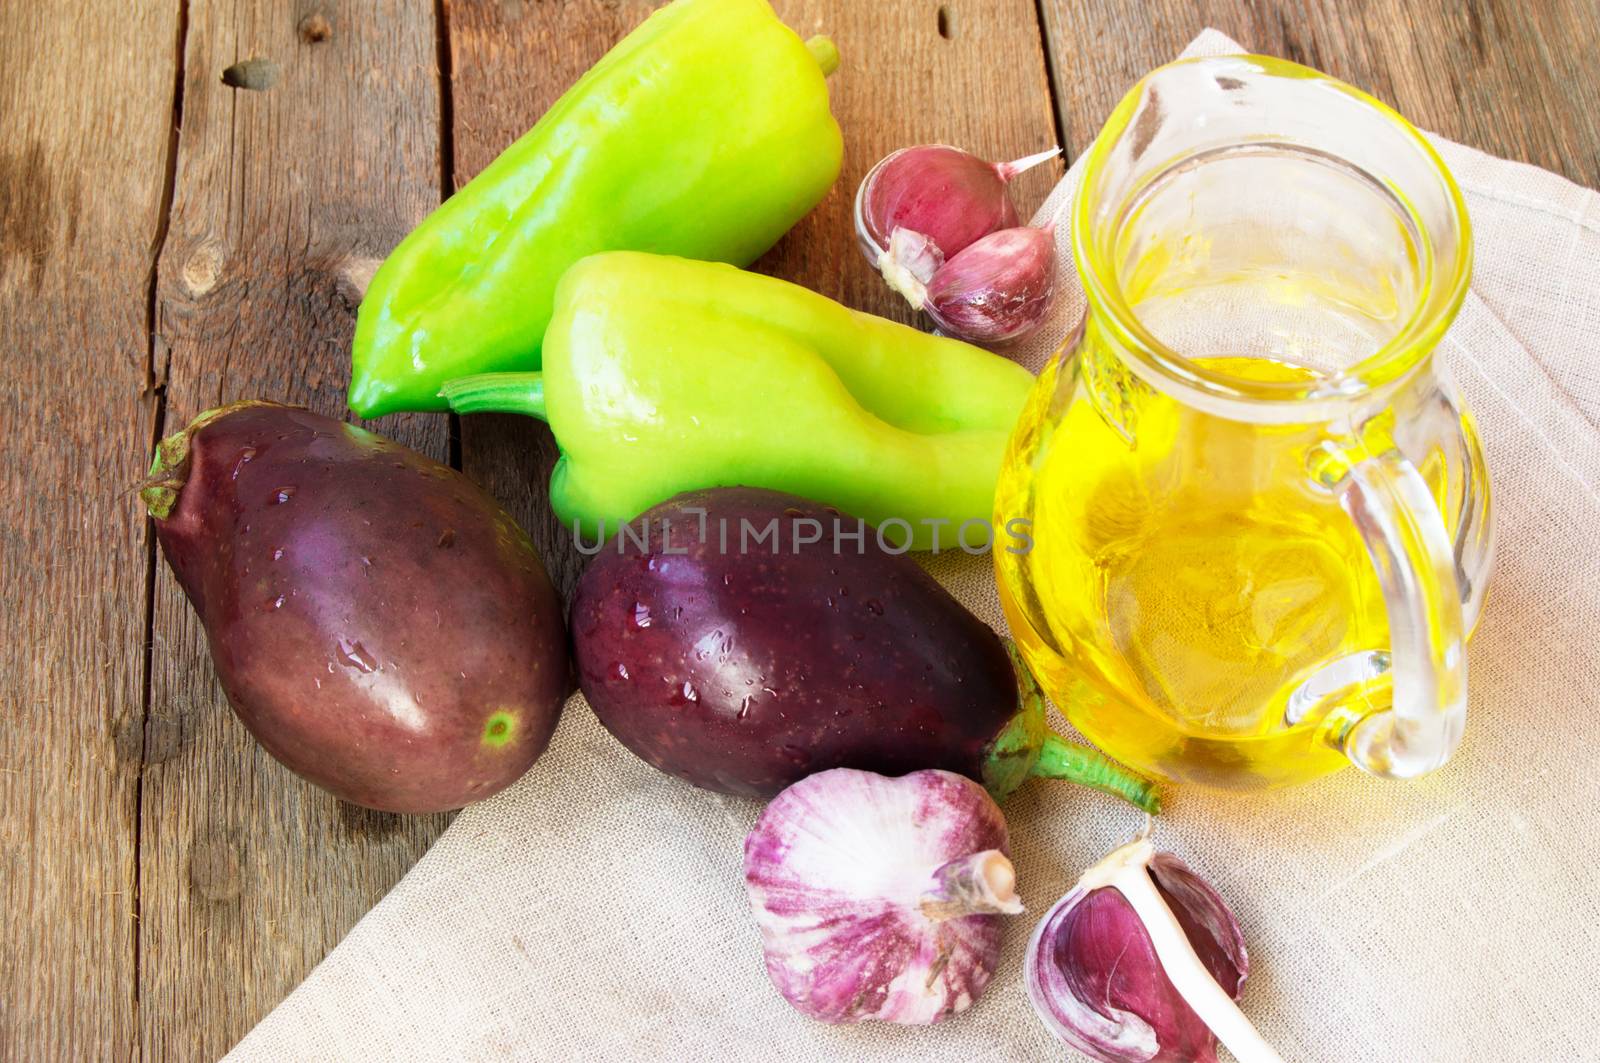 Raw eggplant, garlic, olive oil, sweet pepper, healthy eating and diet concept on the old wooden background by claire_lucia